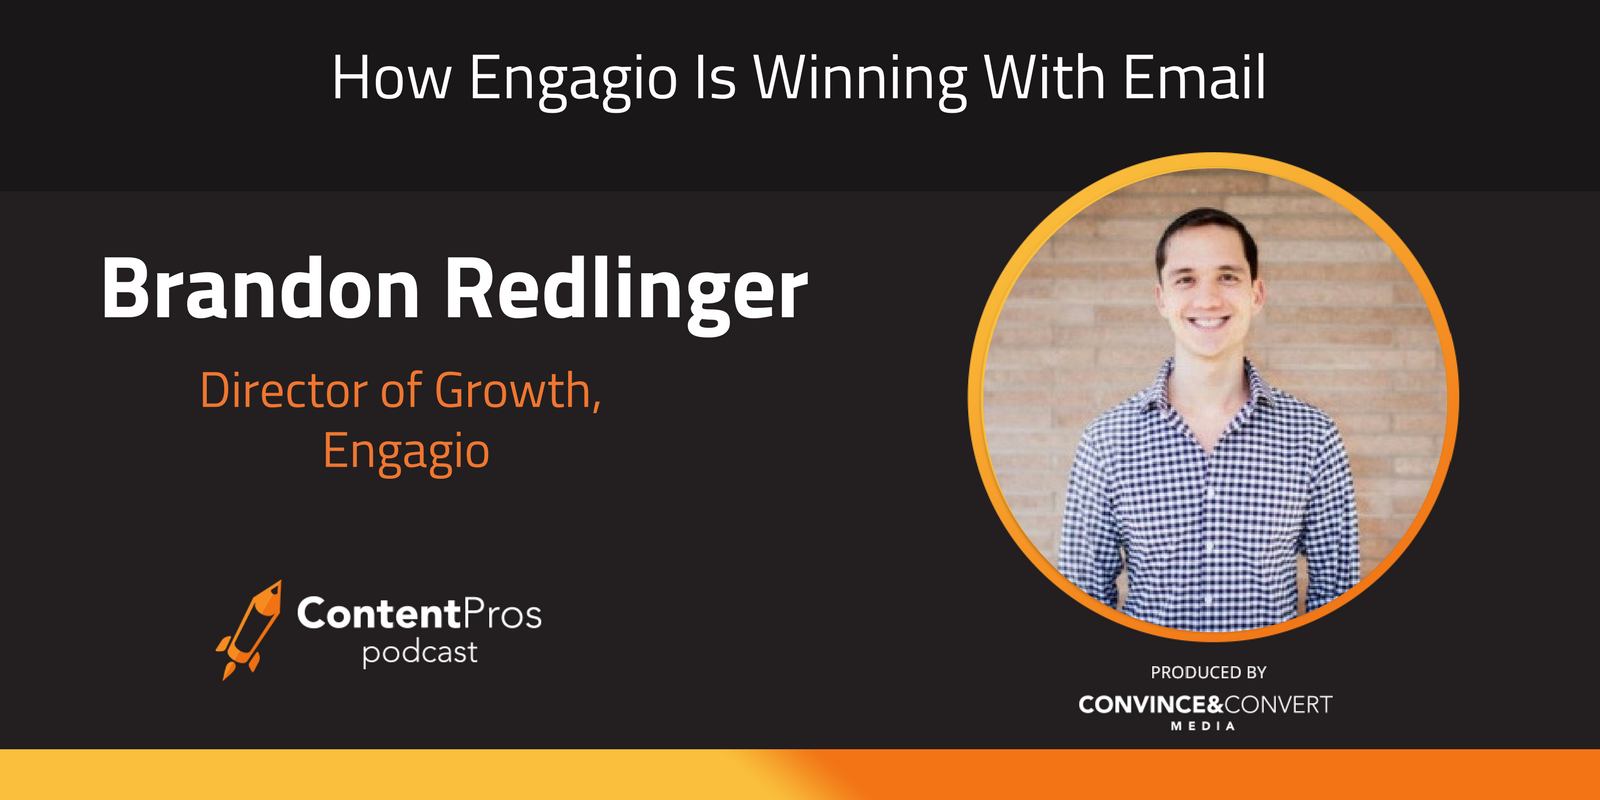 How Engagio is winning with email